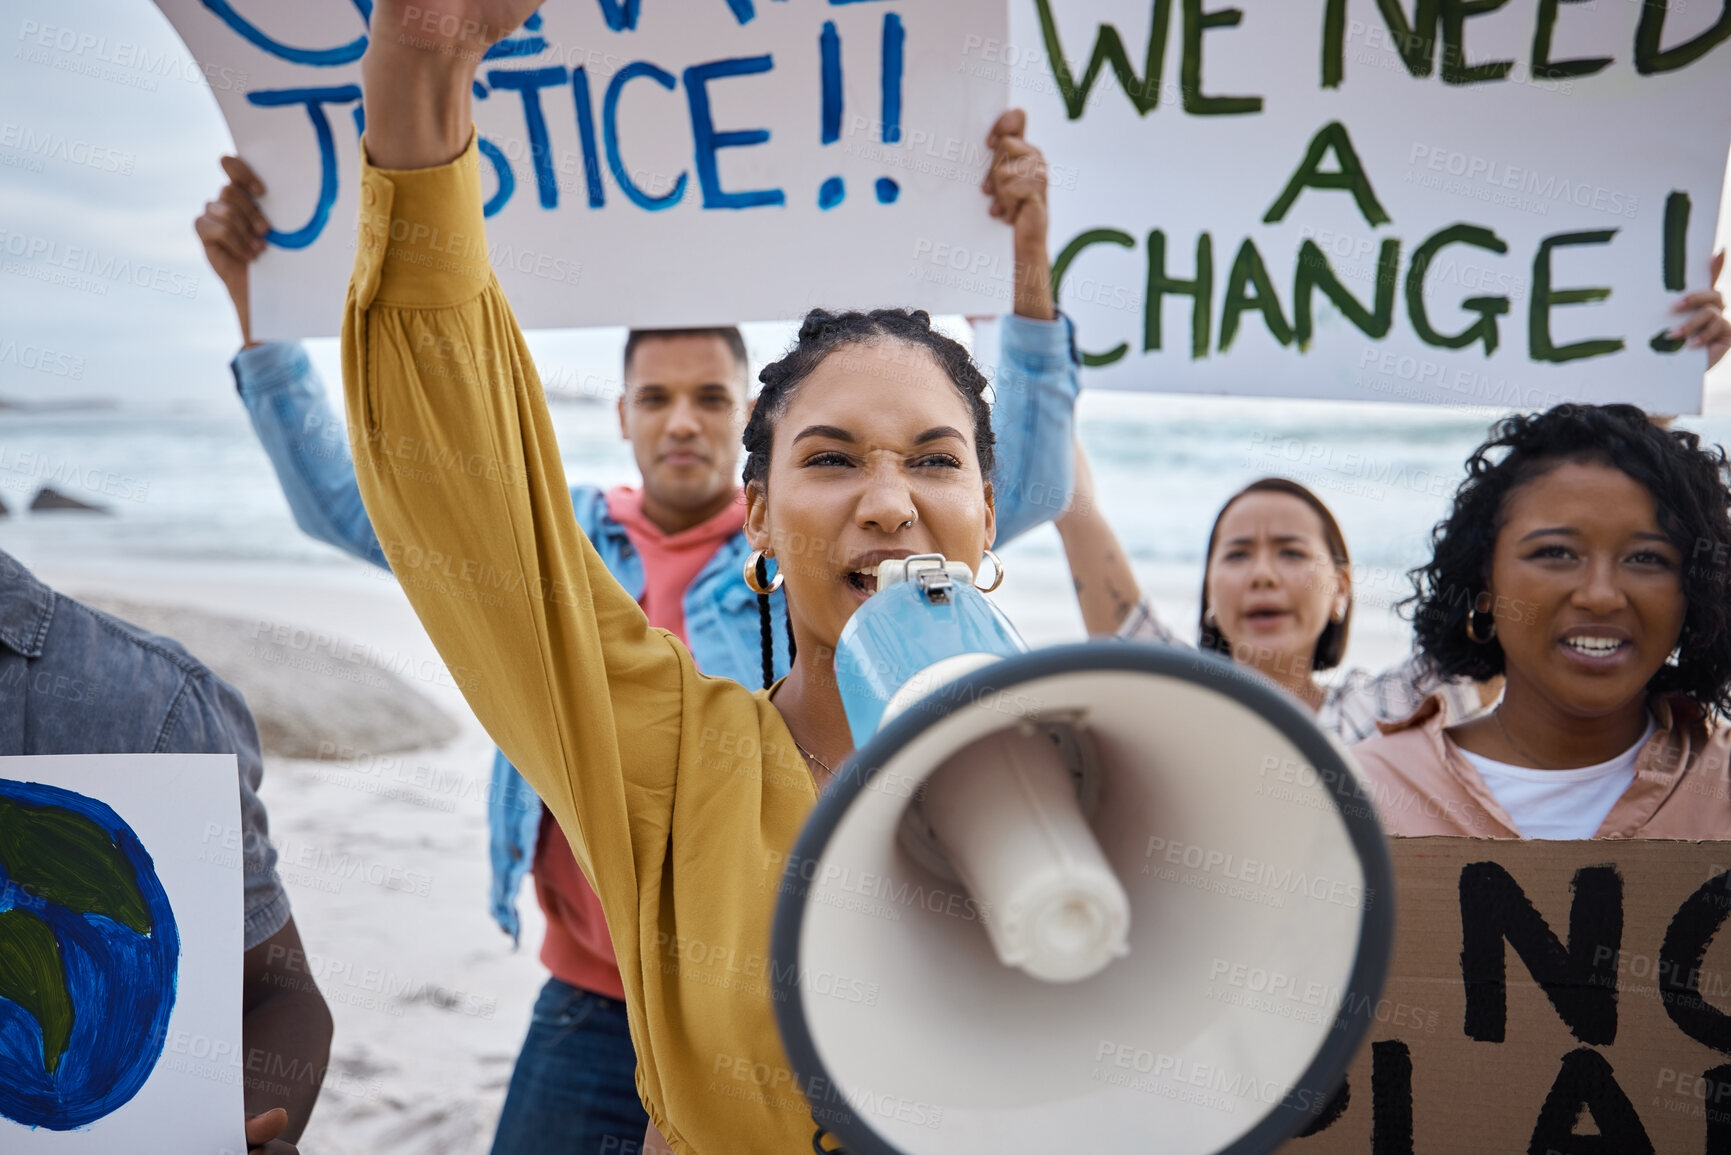 Buy stock photo Protest, climate change and black woman with megaphone, fight for freedom with voice, movement and environment rights. Politics, angry people on beach for activism and solidarity with saving planet